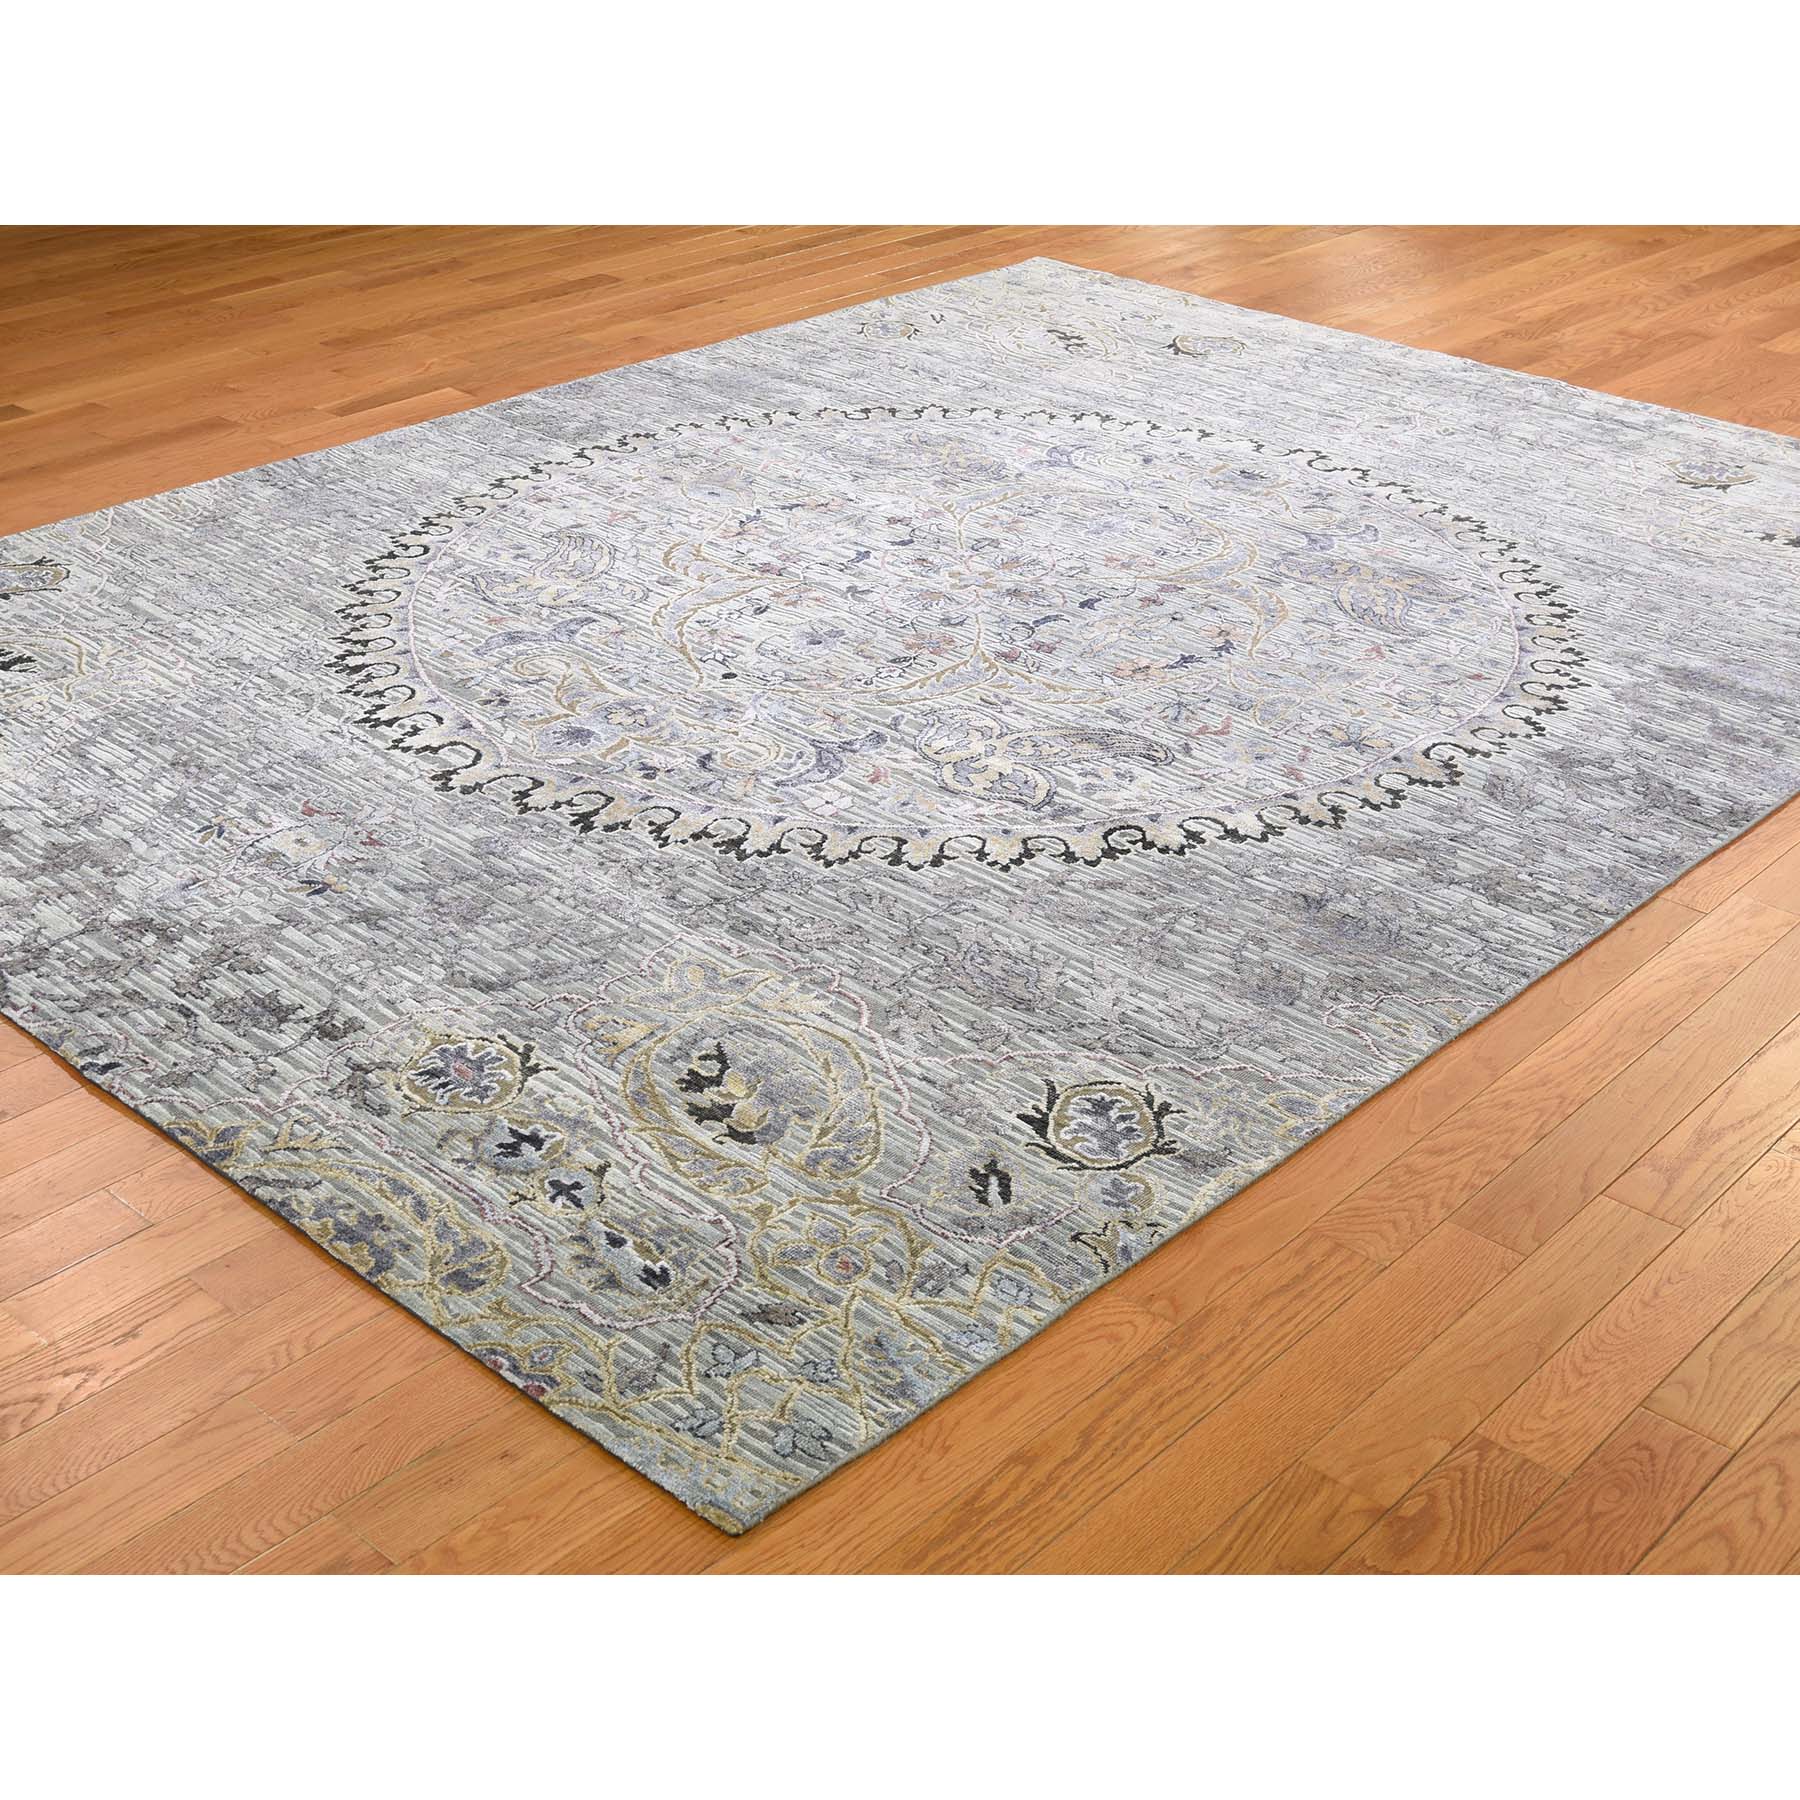 7-9 x10-1  THE MAHARAJA, Silk with Textured Wool Hand-Knotted Oriental Rug 